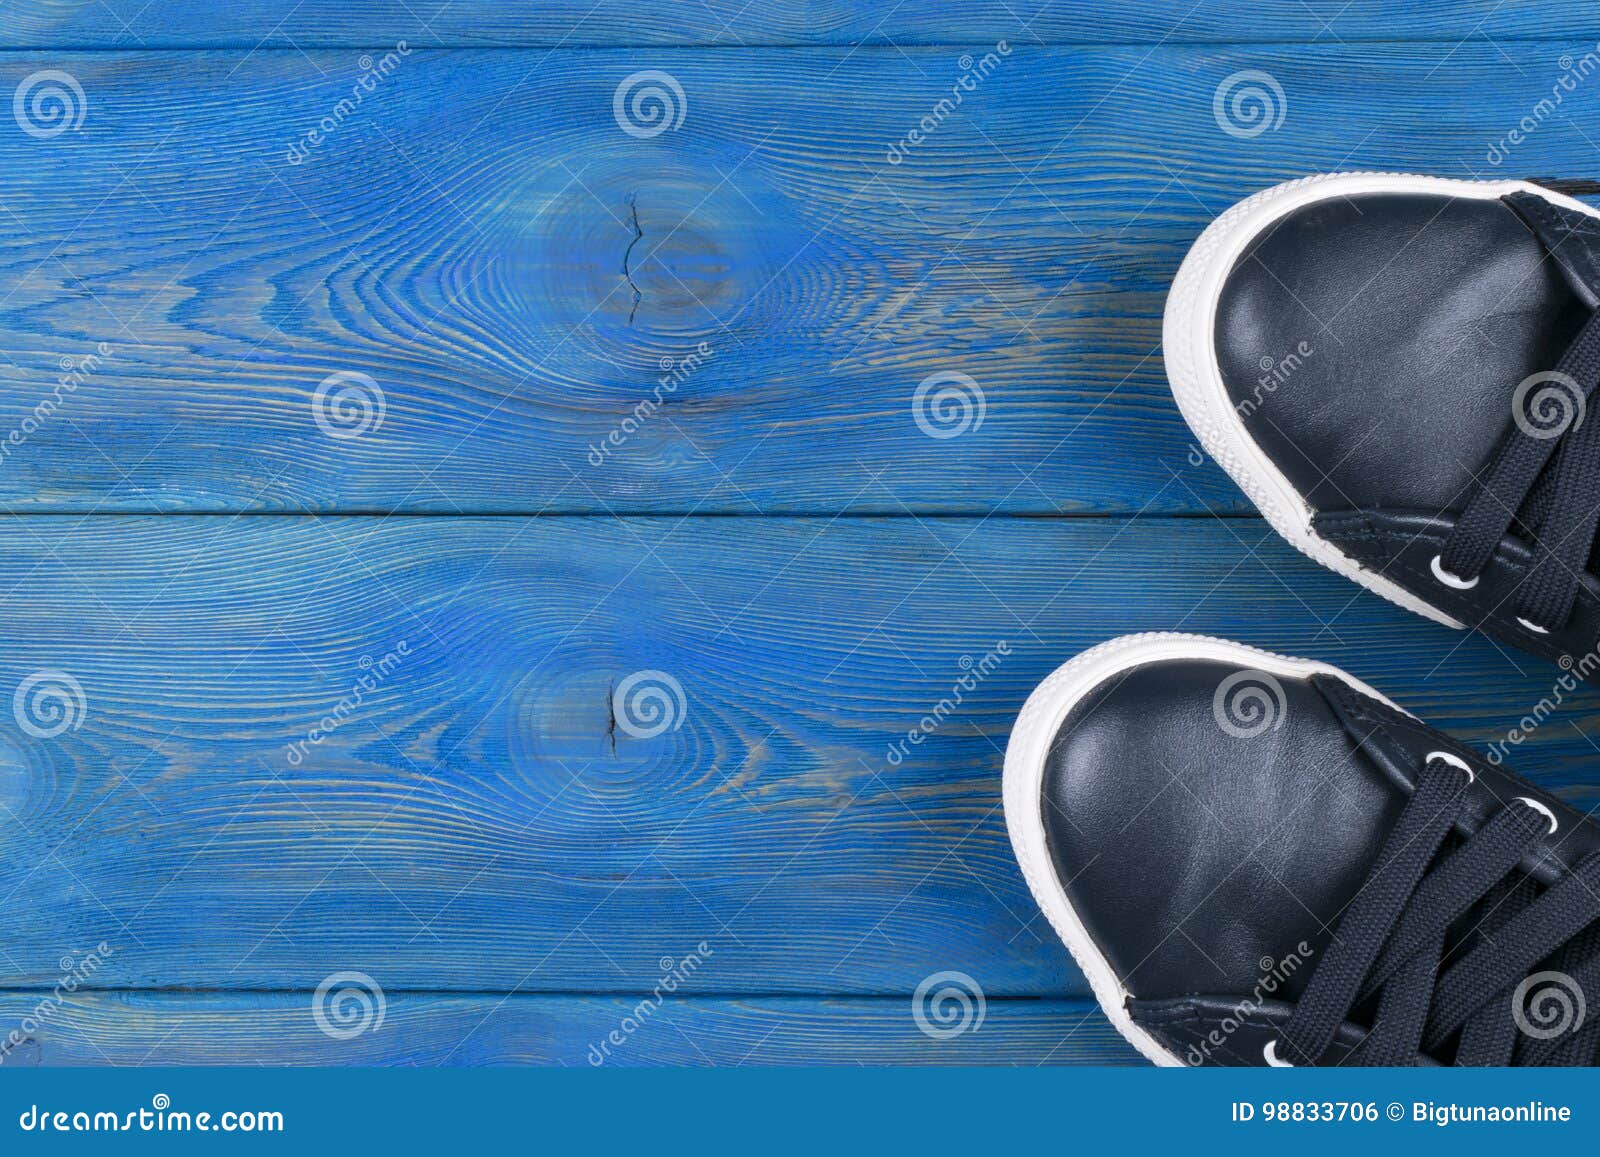 Overhead View of Shoes on Blue Wooden Floor. Shoes on a Wooden ...